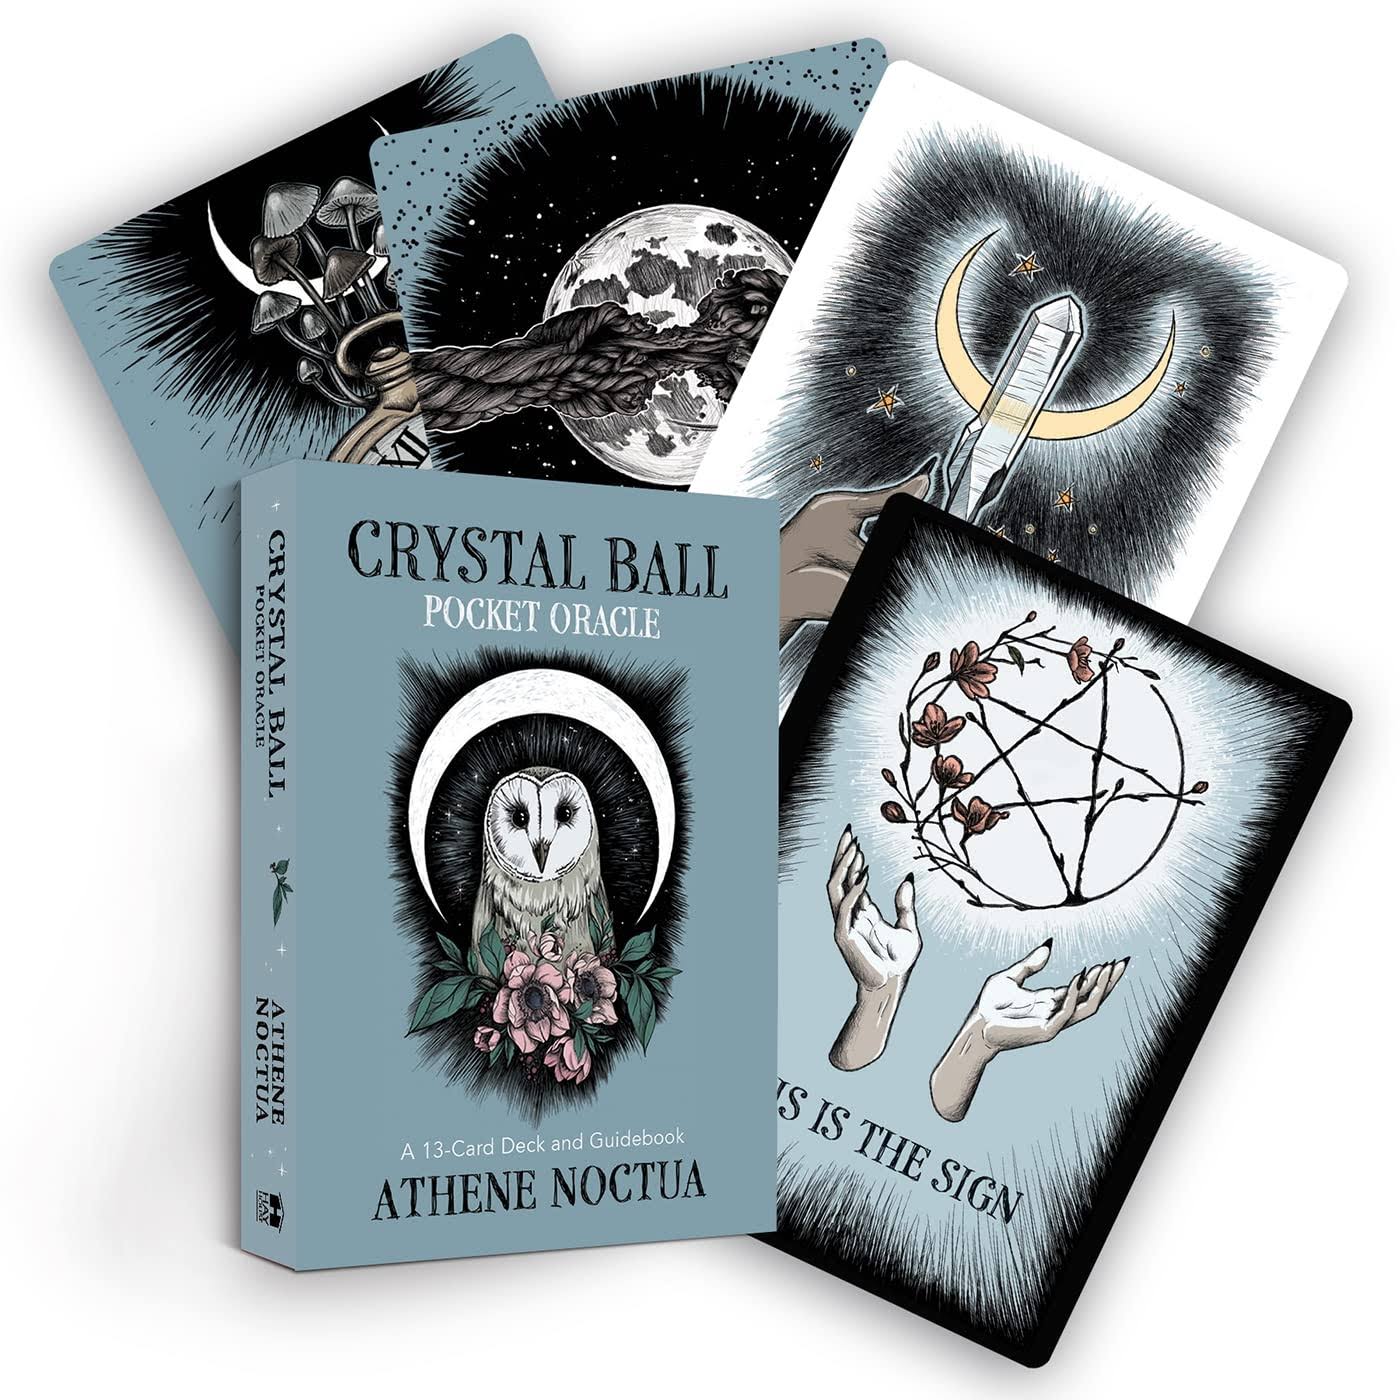 Crystall Ball Pocket Oracle: A 13-card Deck and Guidebook [Book]